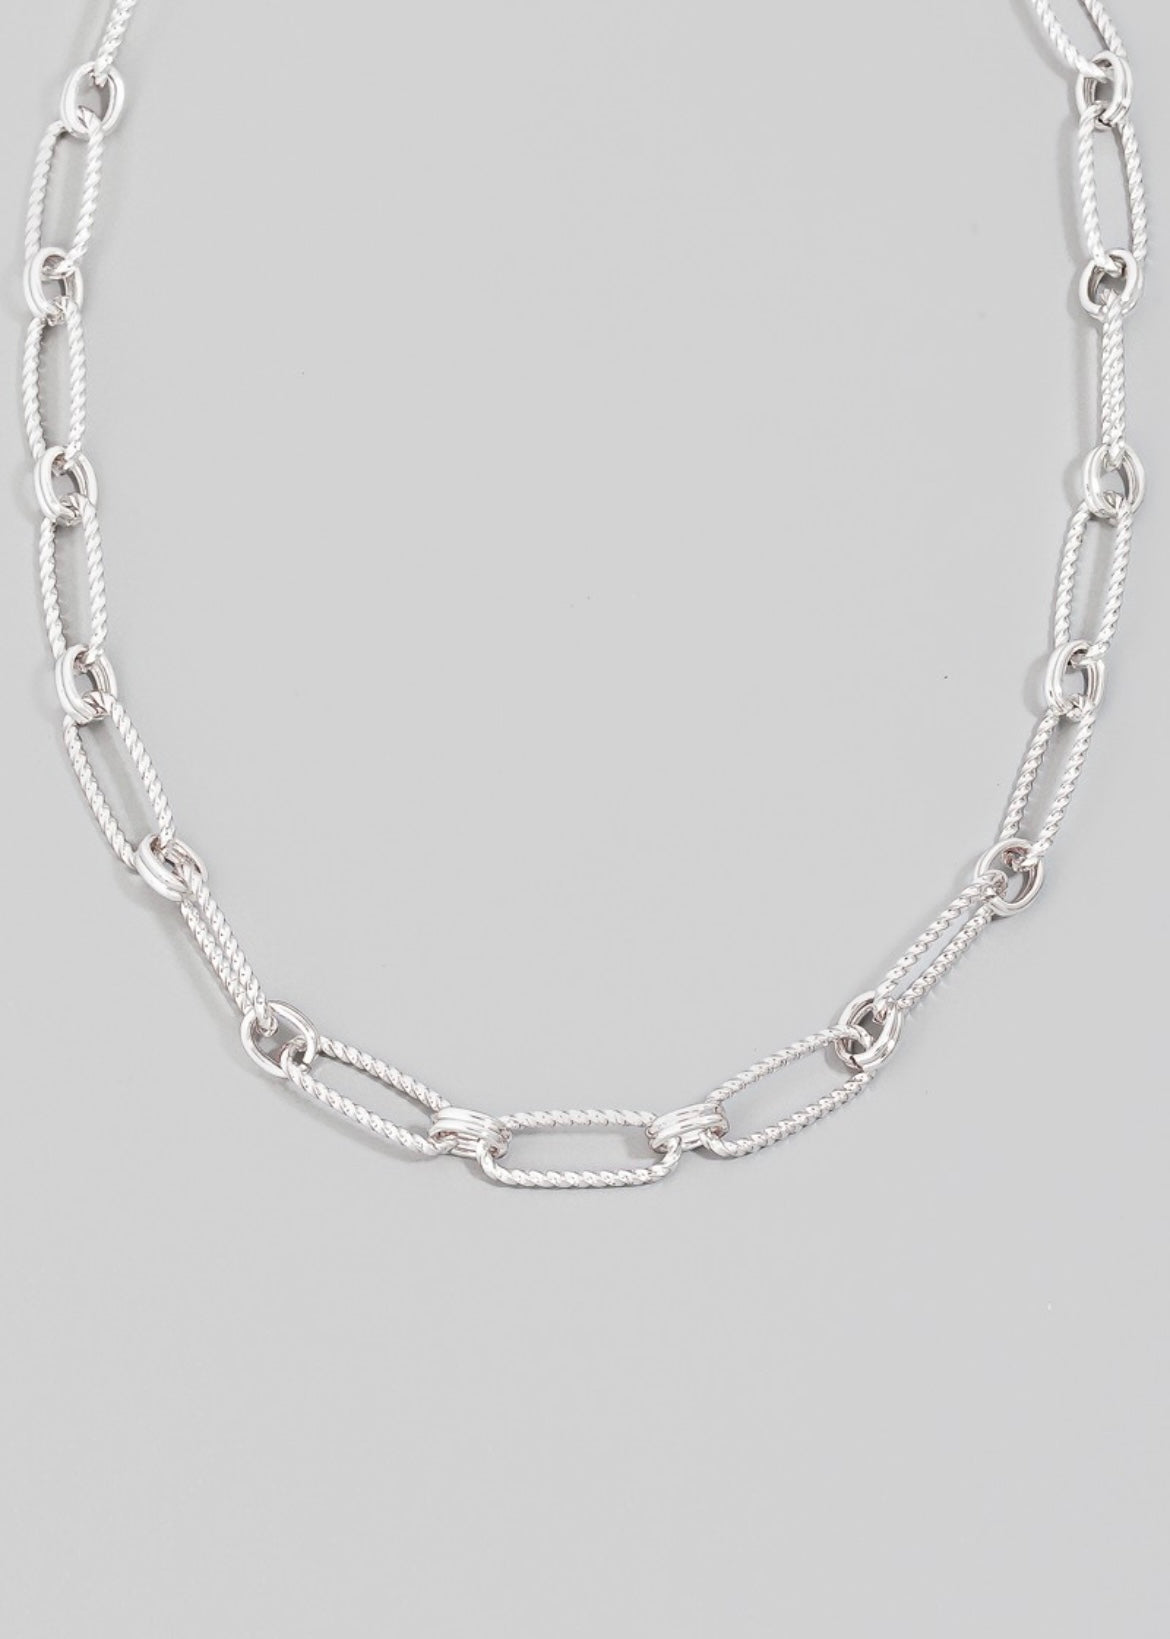 Silver Oval Twist Chain Necklace